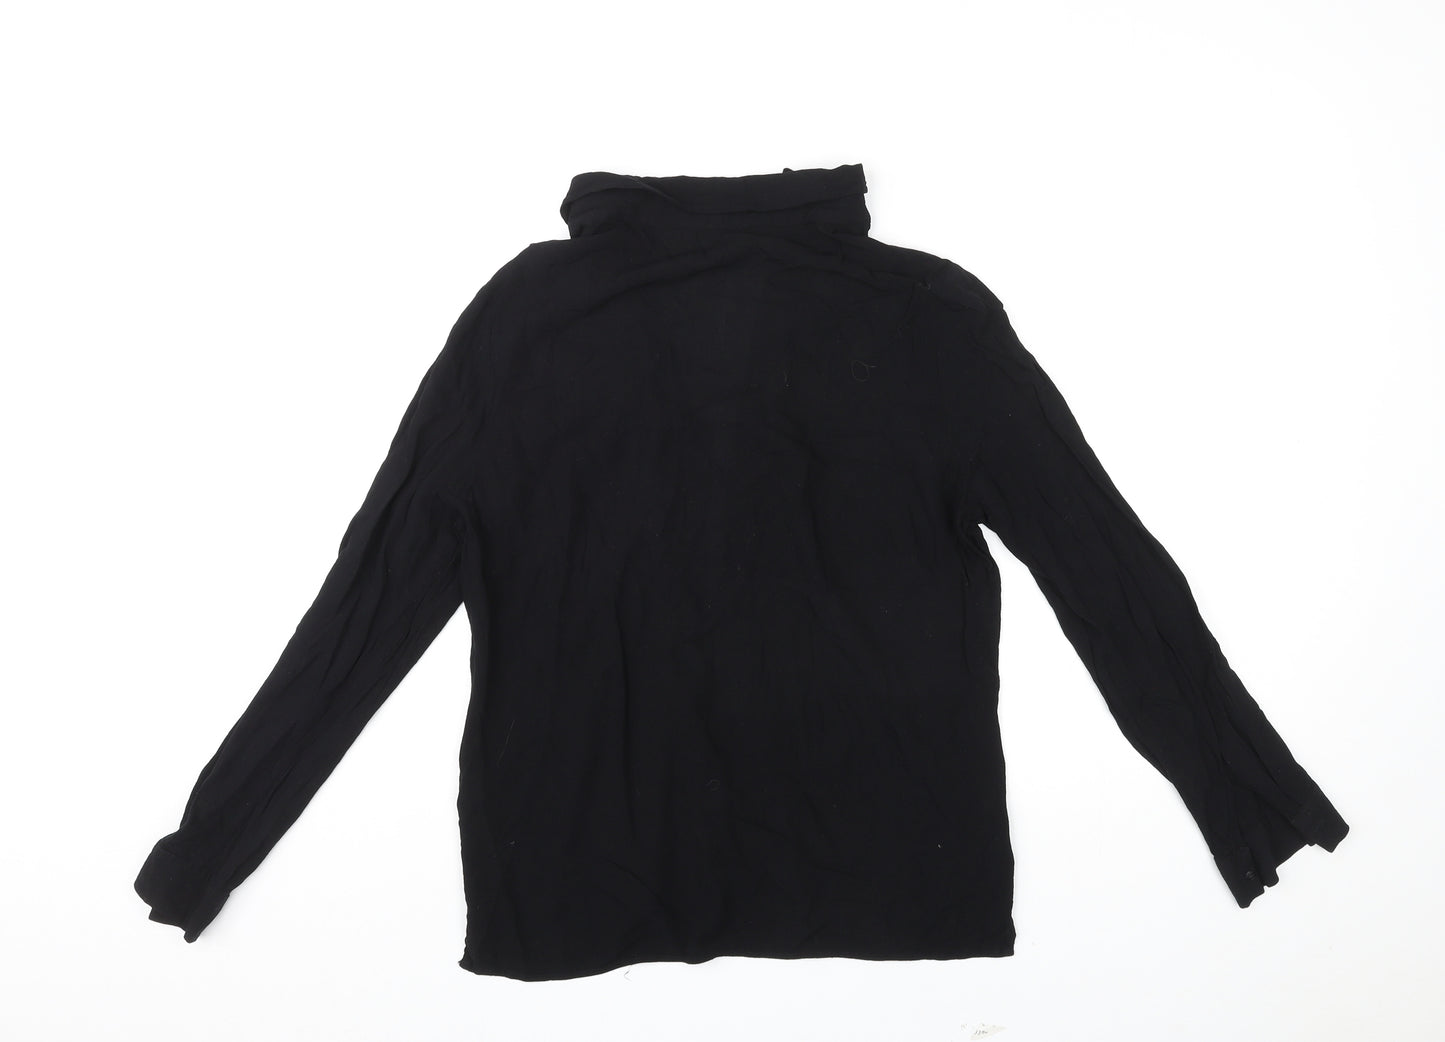 Marks and Spencer Womens Black Collared Viscose Cardigan Jumper Size 12